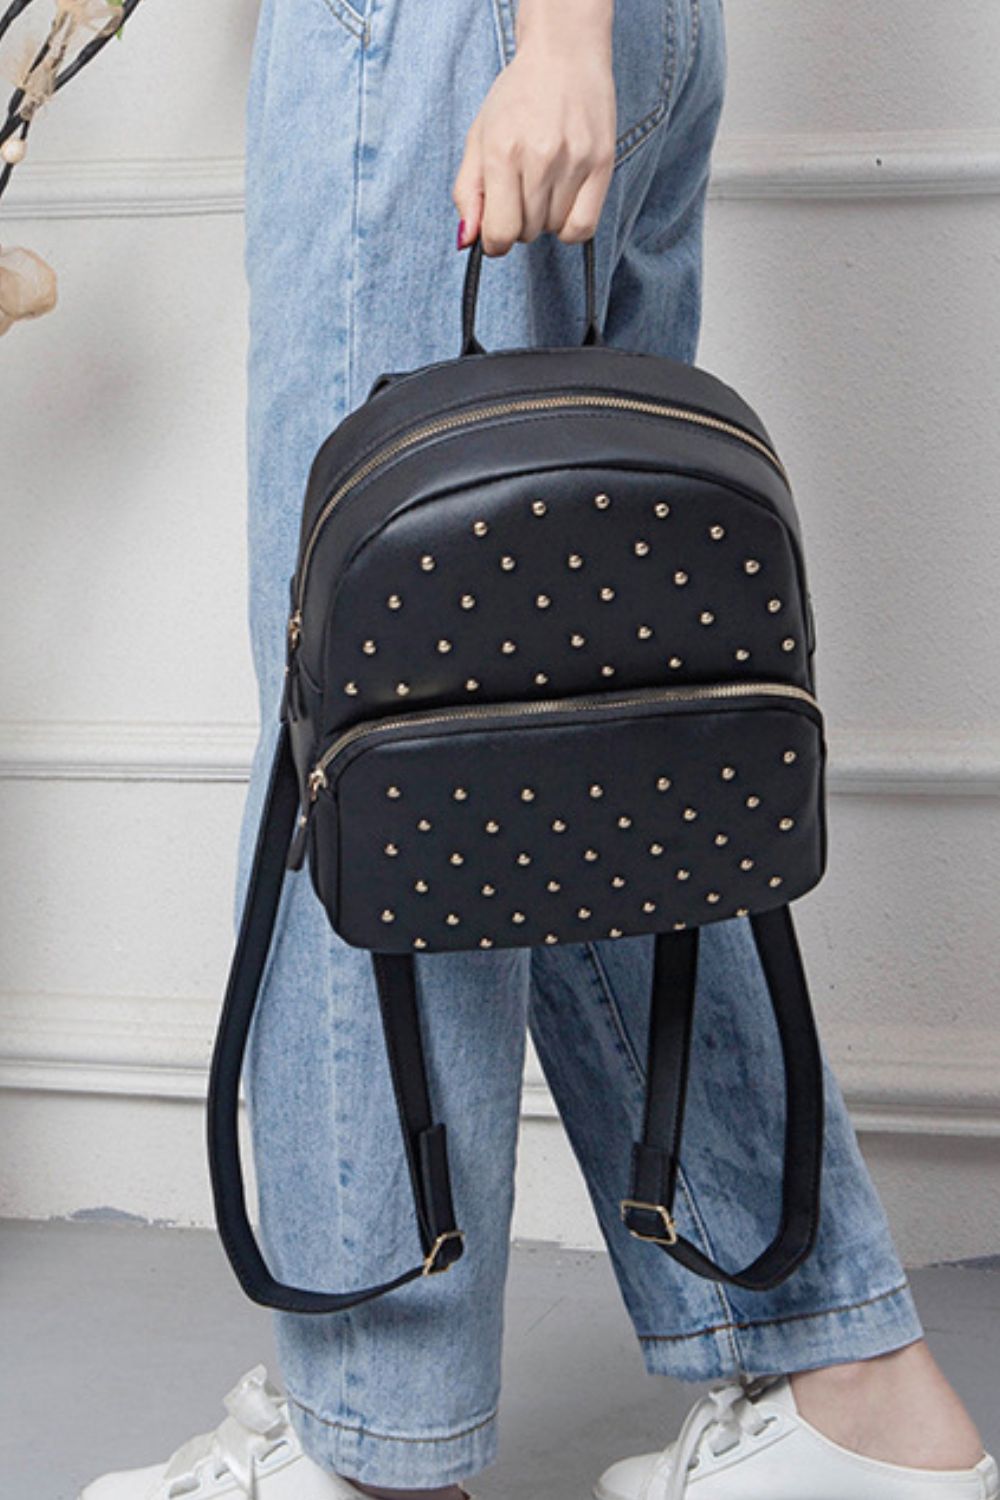 Women's Mini Leather Backpack Purse With Rivets Leather Rucksack For W –  igemstonejewelry